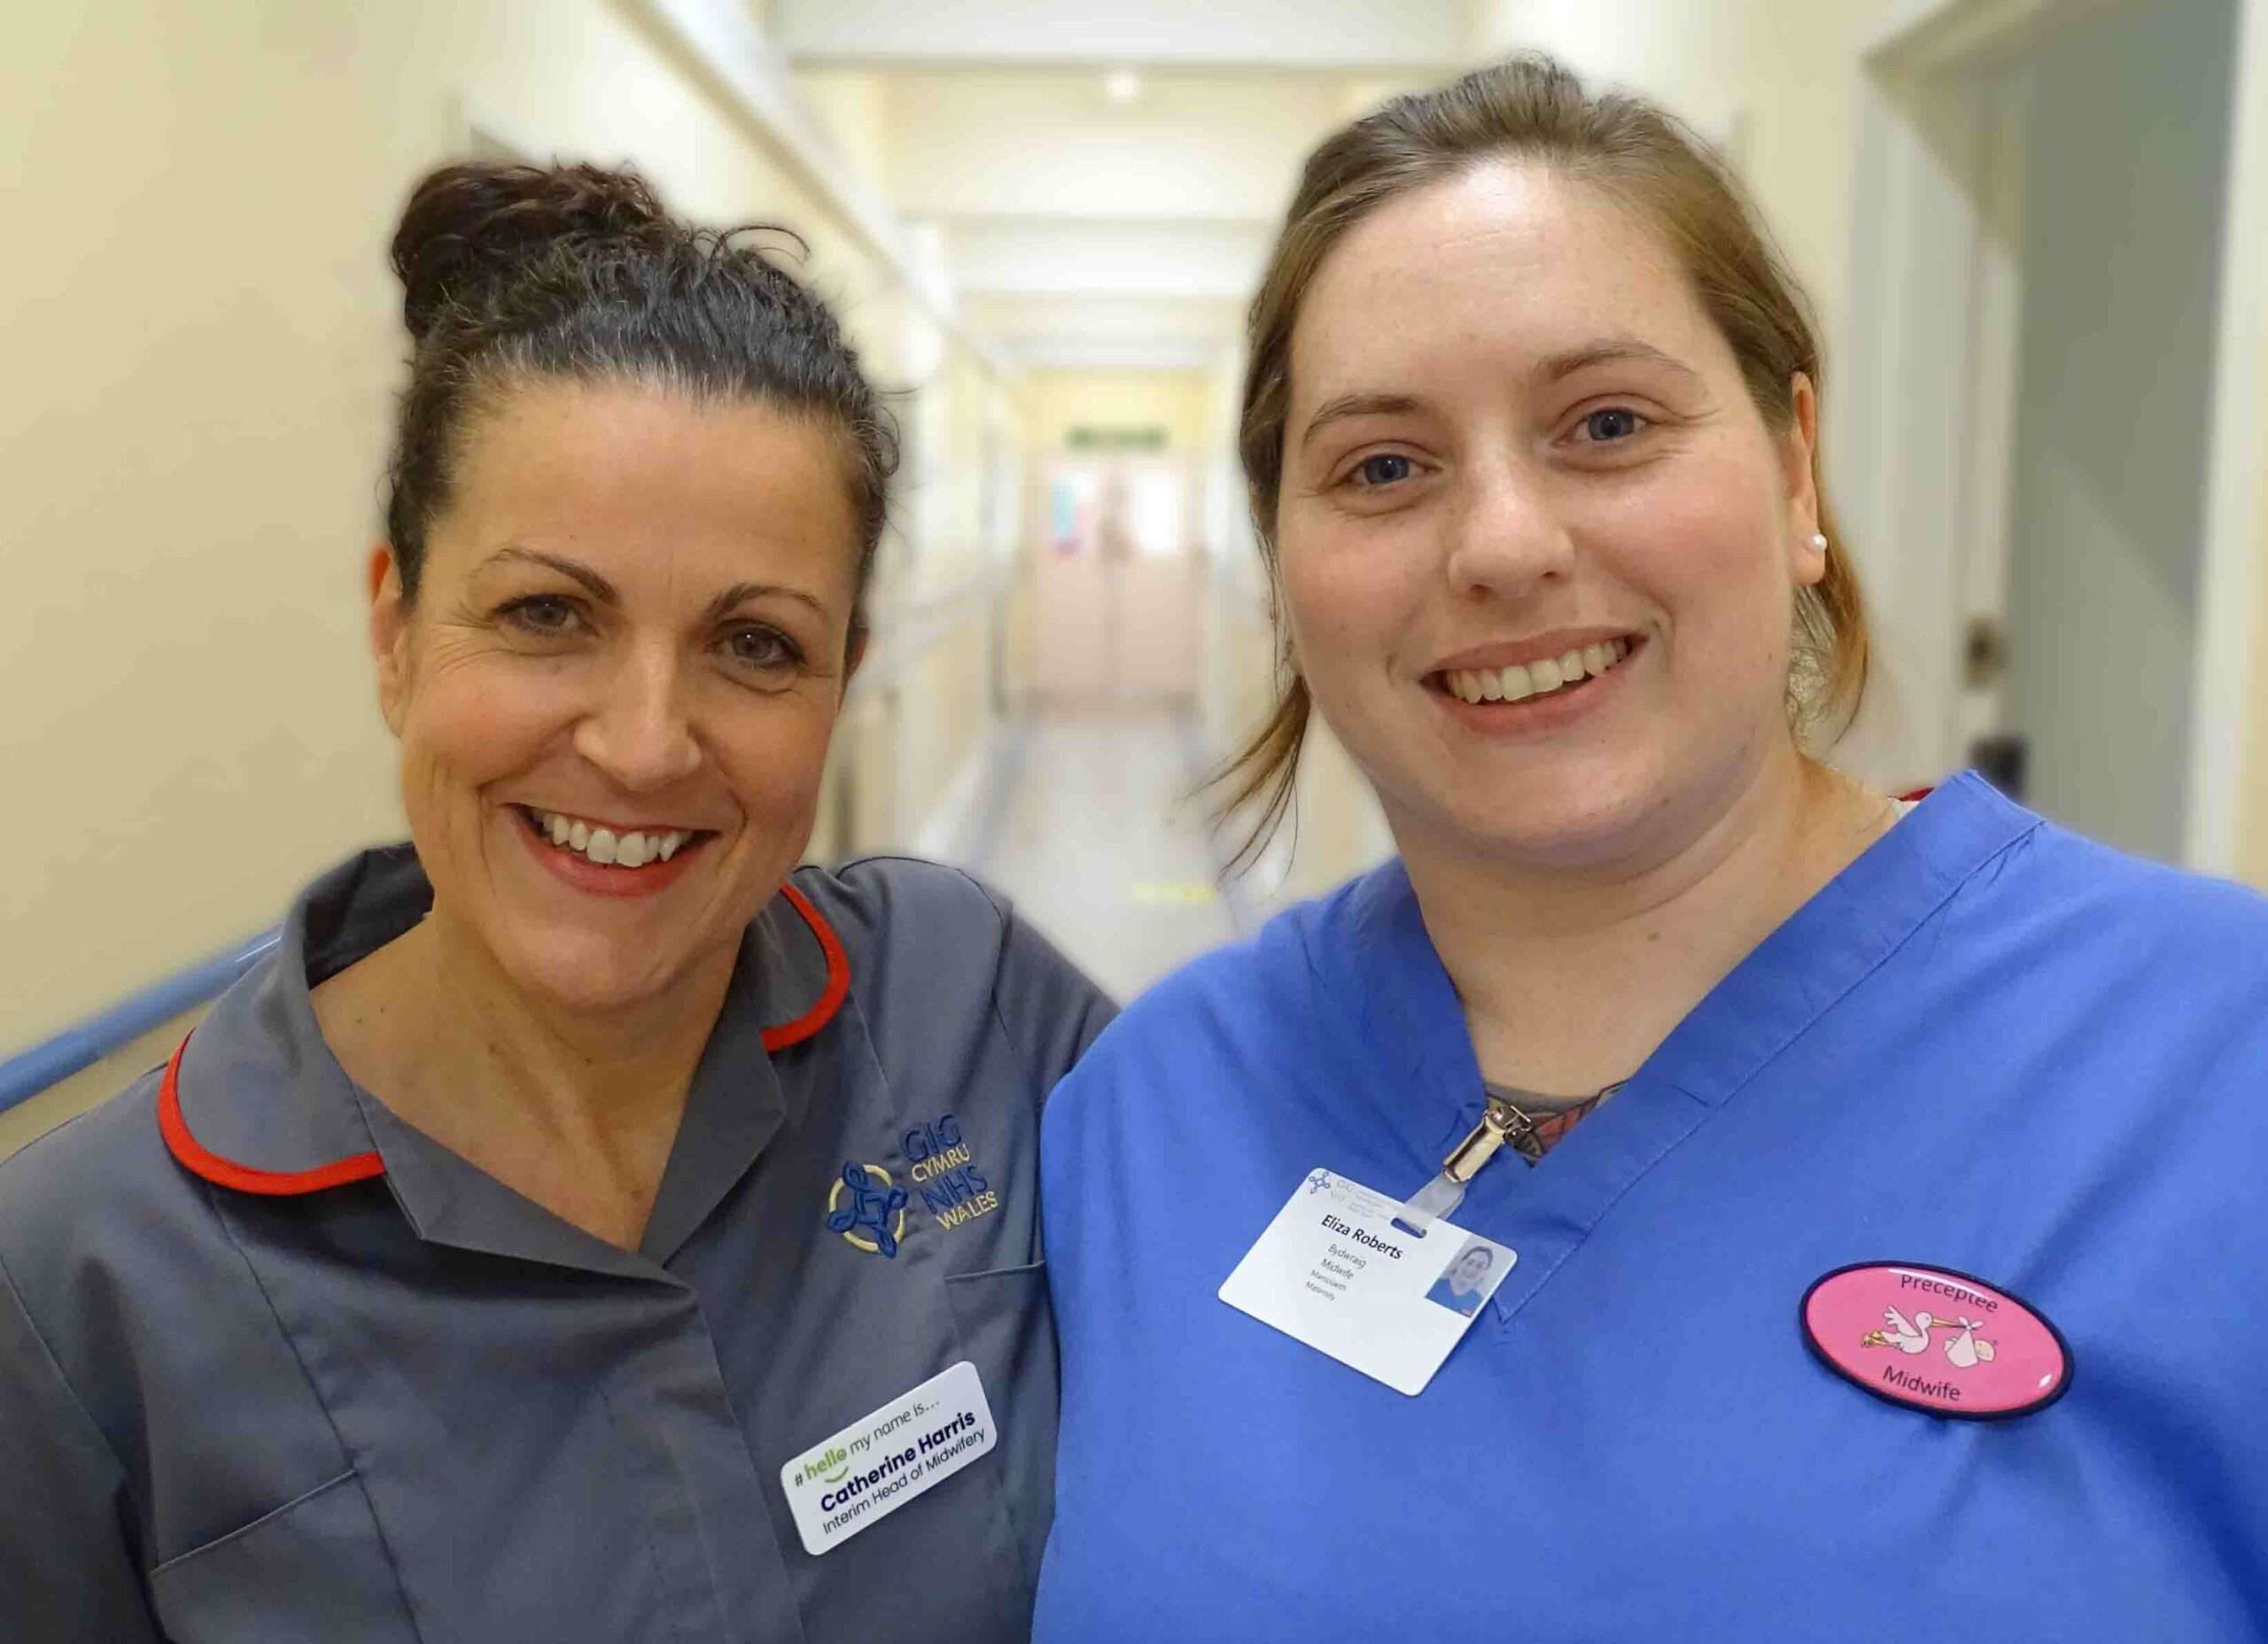 Midwife bullied whilst training in England finds new start at Singleton Hospital